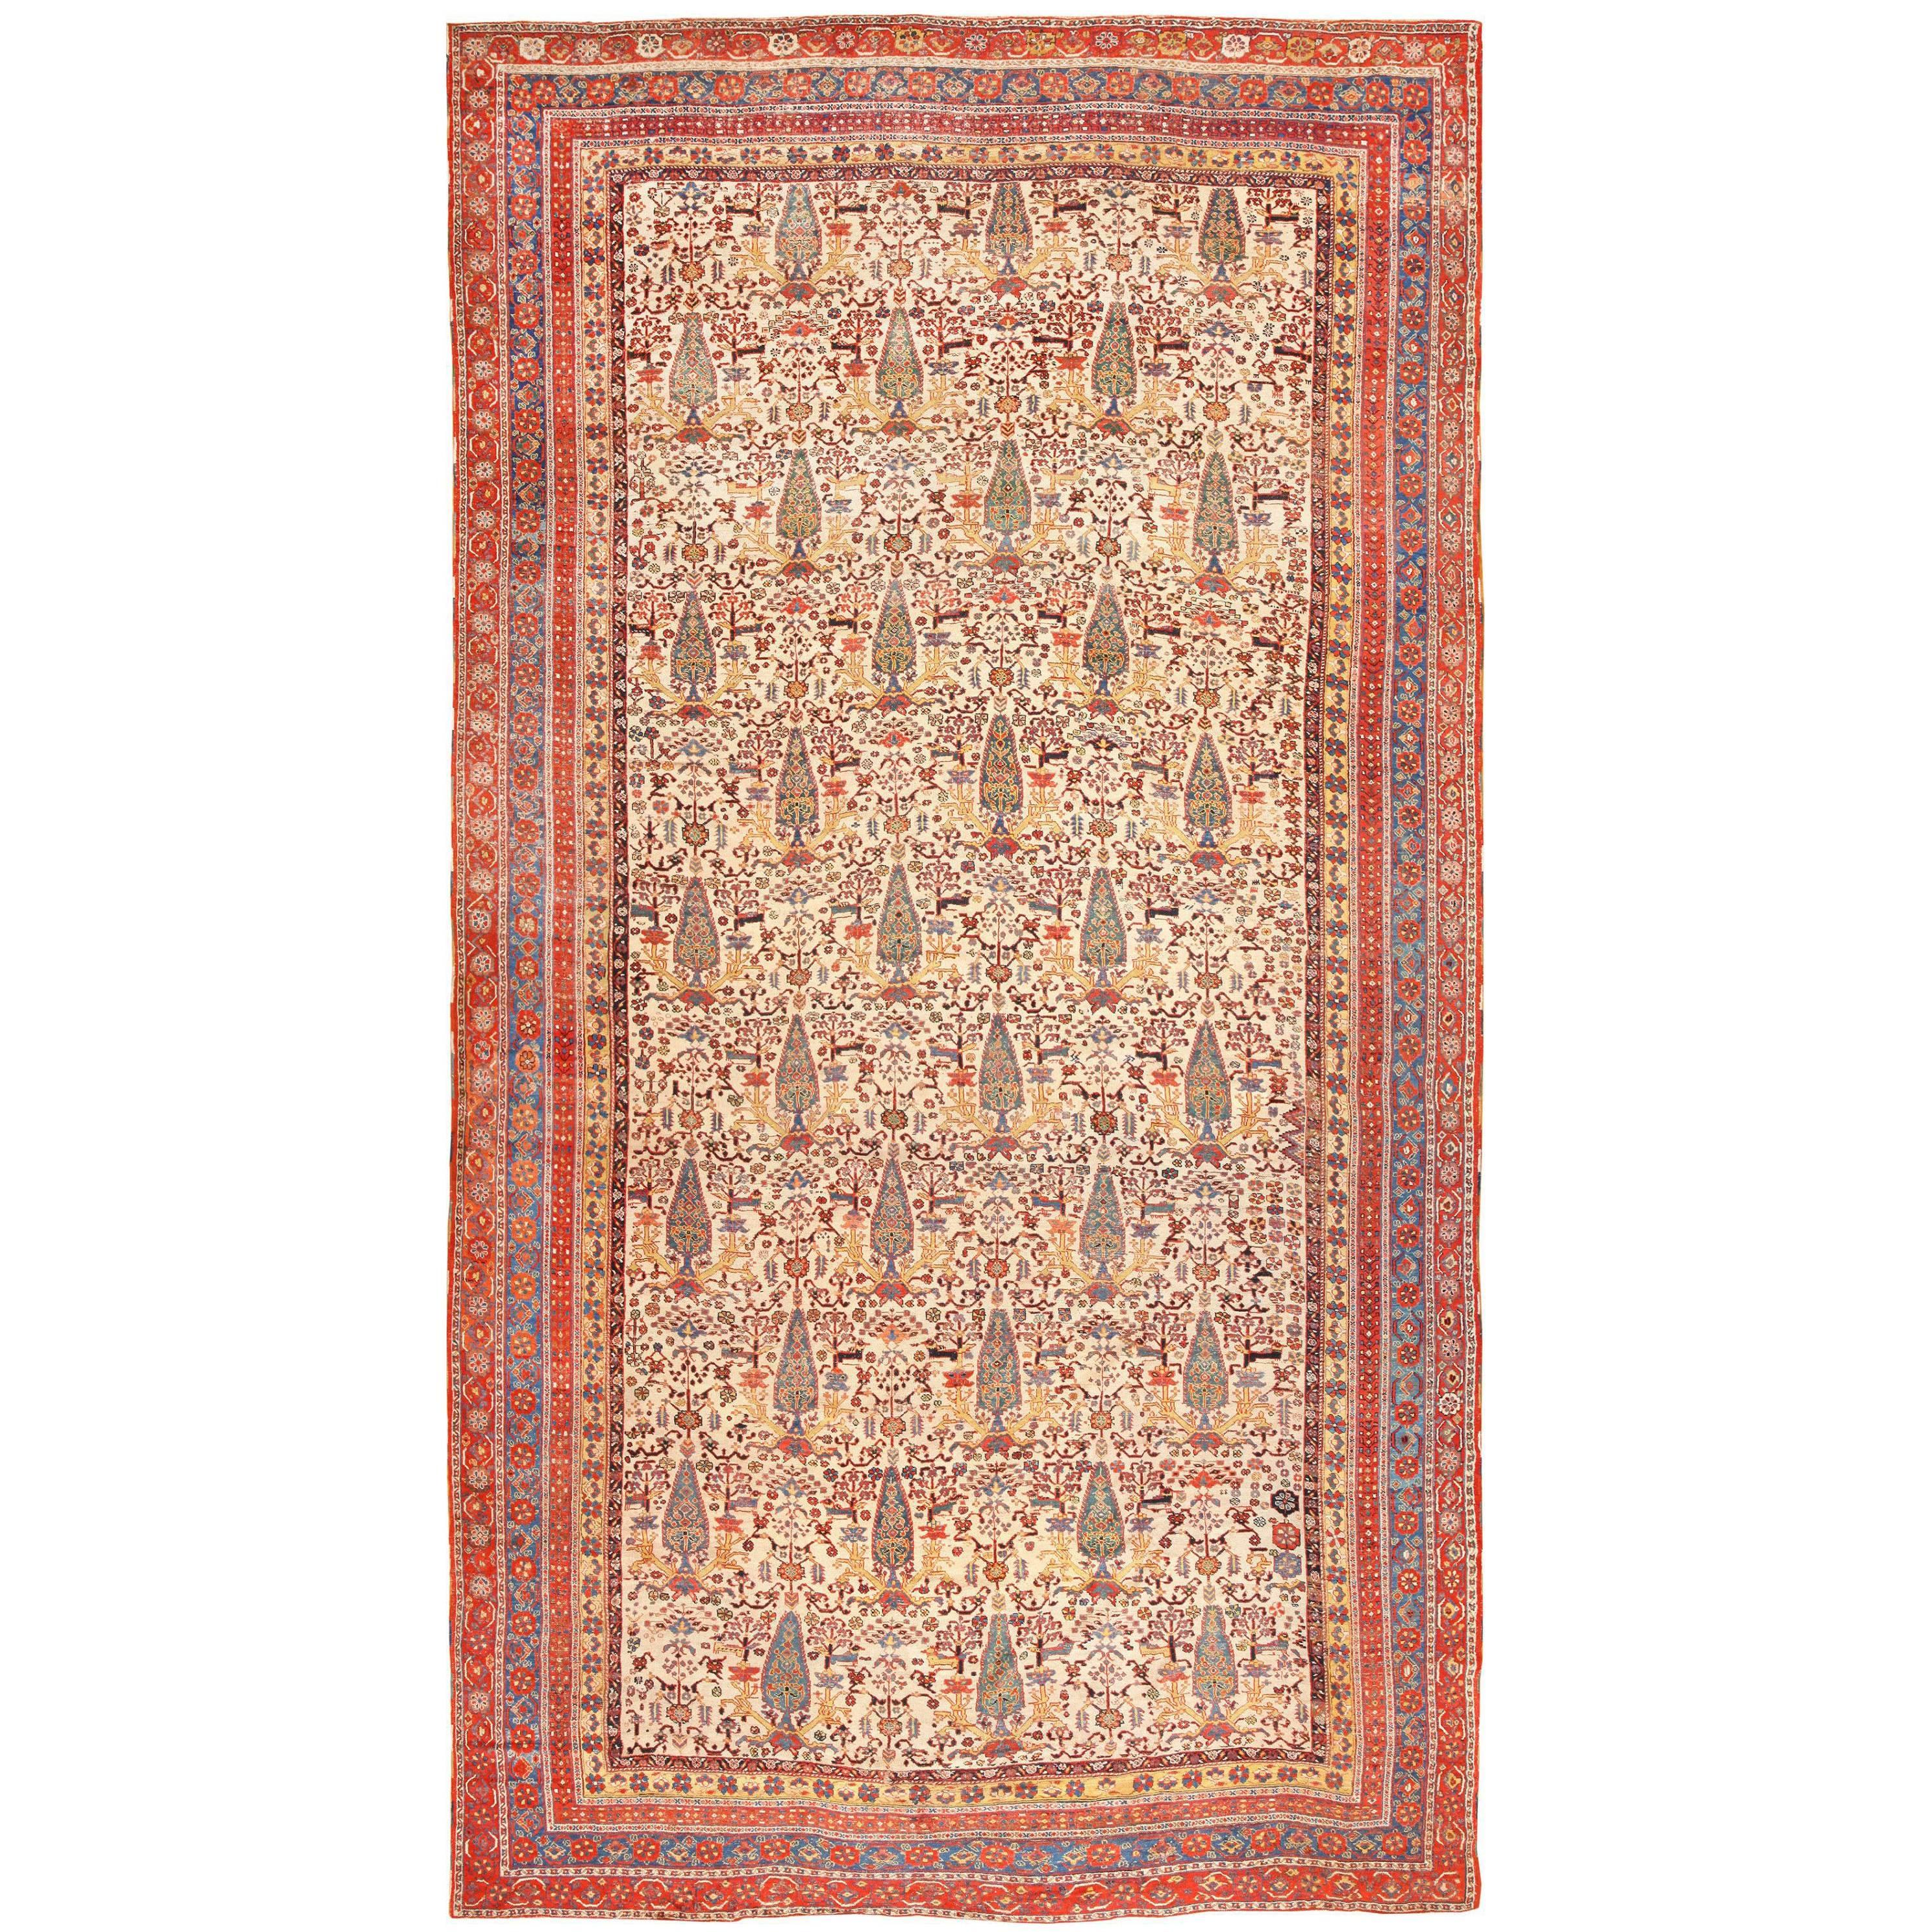 Large Antique Persian Qashqai Rug. Size: 12 ft 8 in x 24 ft (3.86 m x 7.32 m)